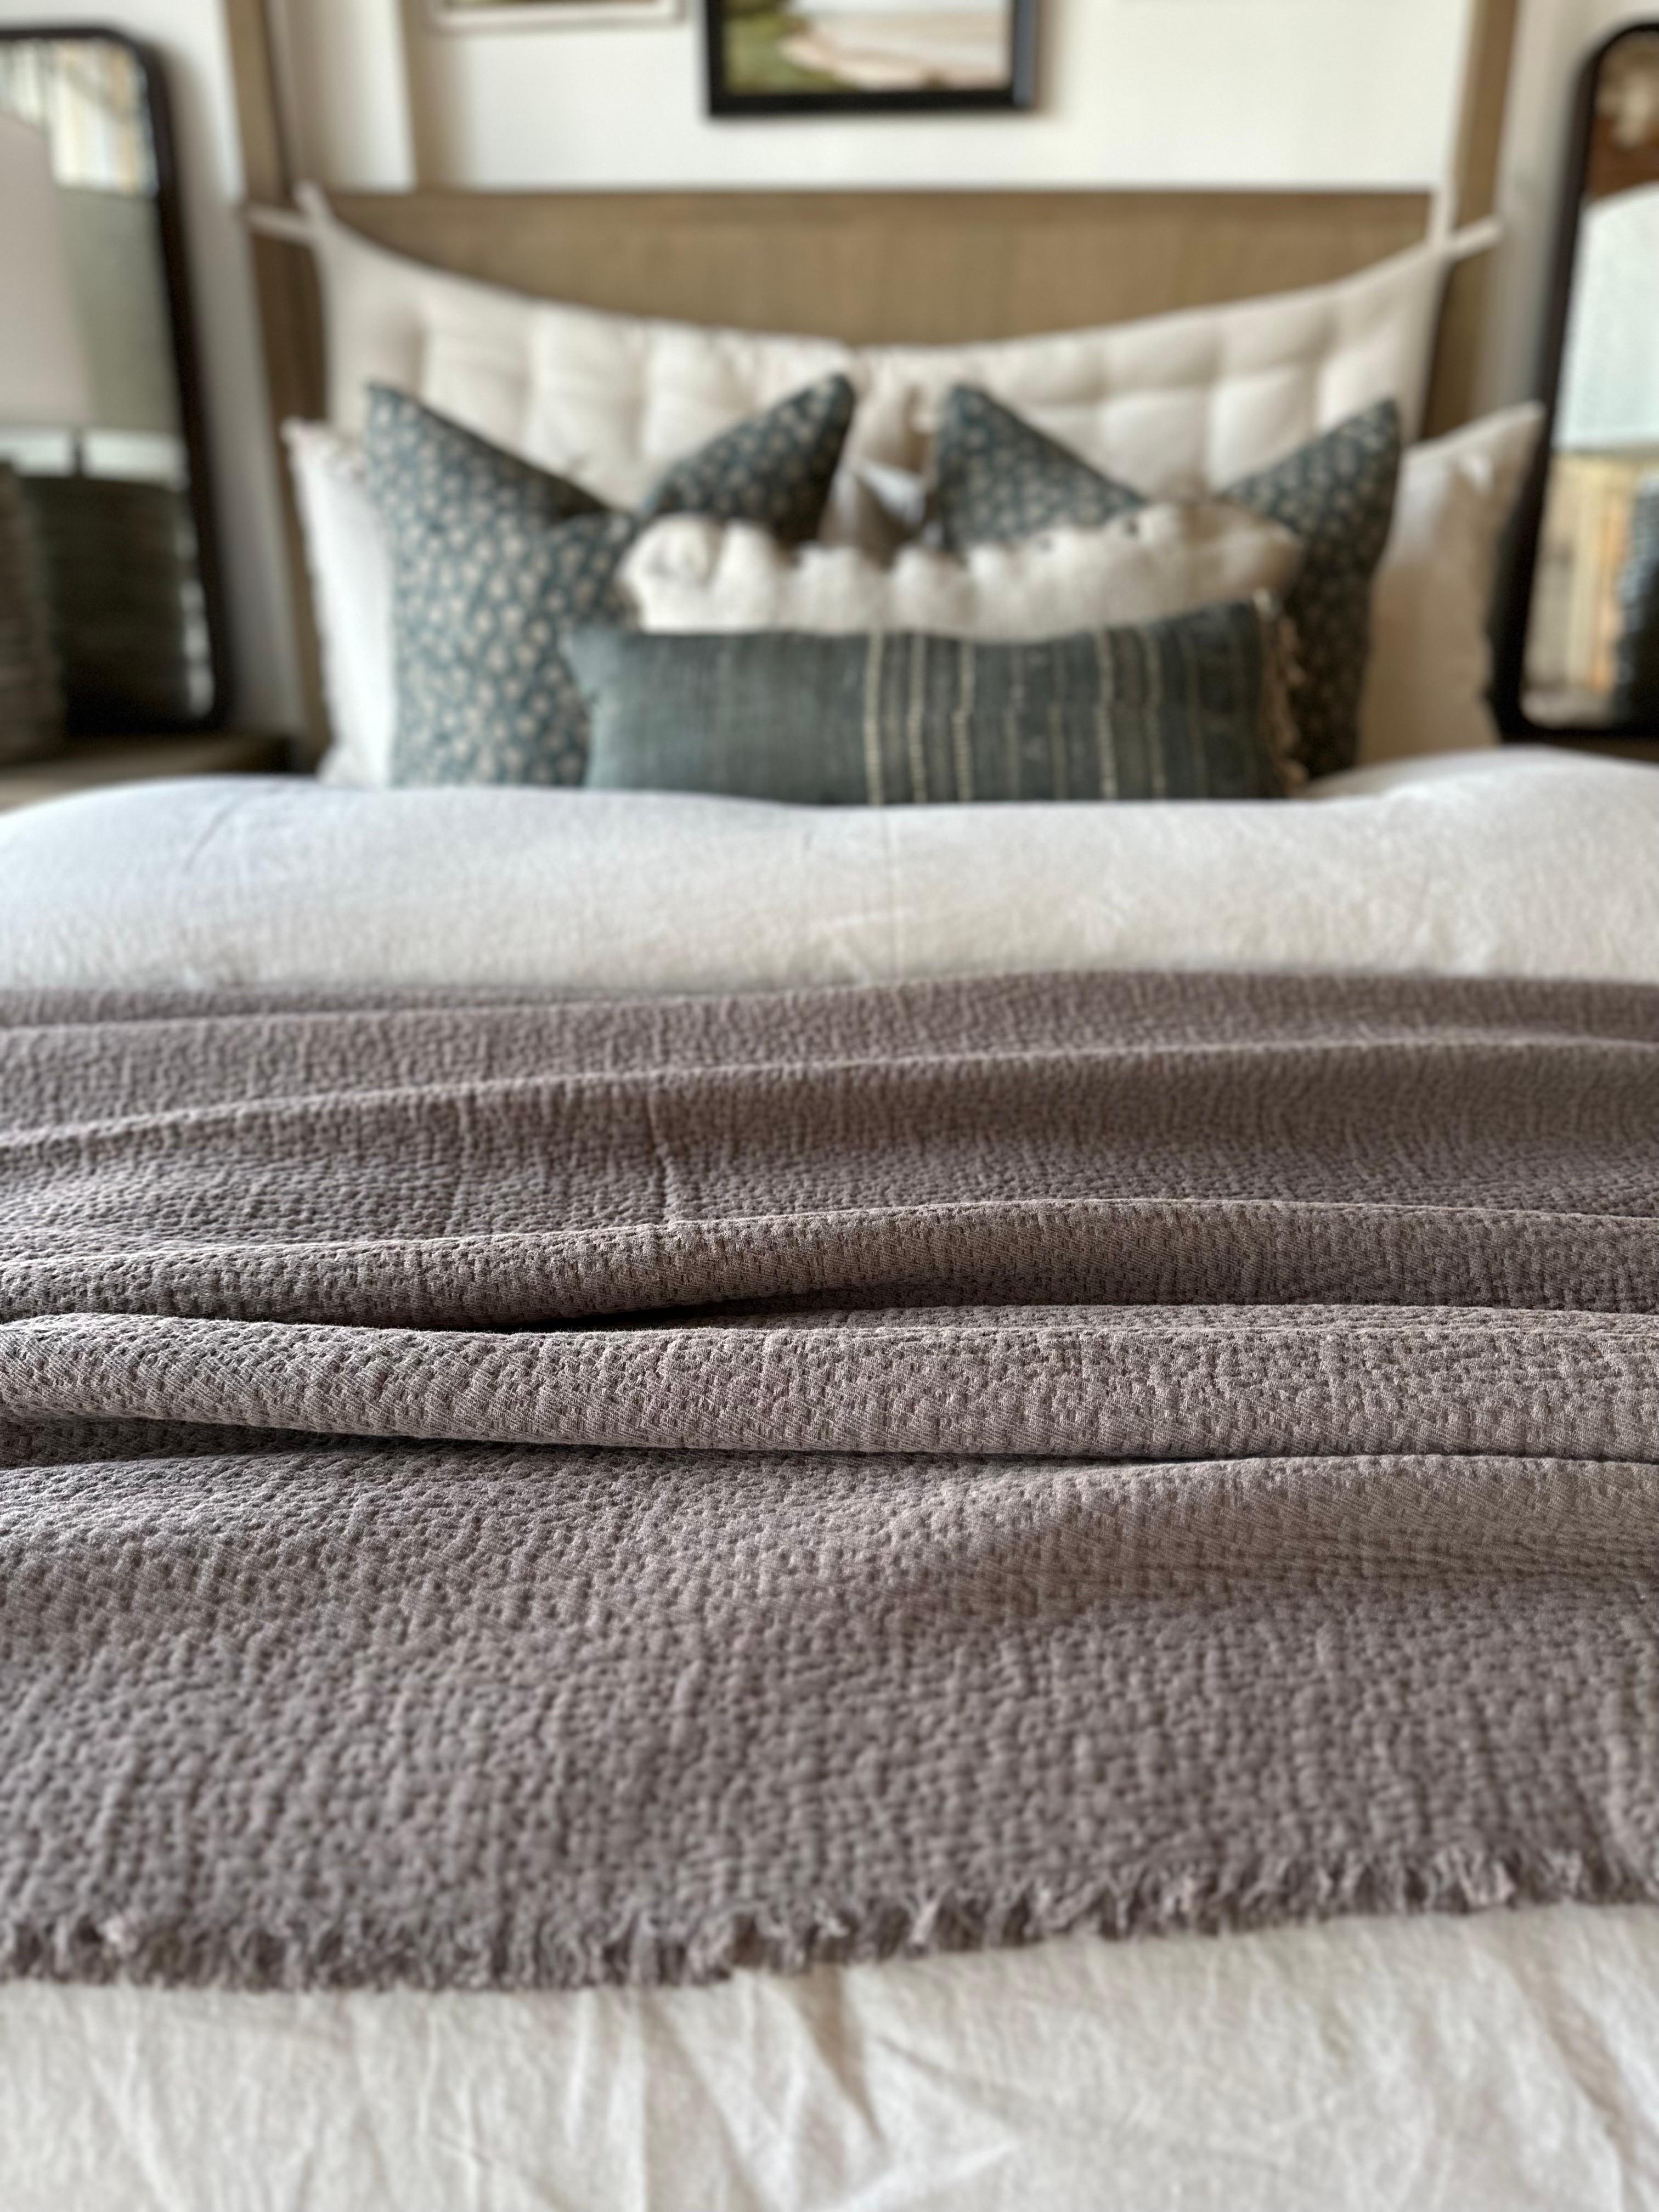 A soft plush cotton coverlet with great texture. Great to use as an accent at the end of the bed, or use as a coverlet.
Color: Beige-Rose-104-94 ( a dark moody mauve grey brown)
Size : 94x102
Large size can accomodate a queen size or king size